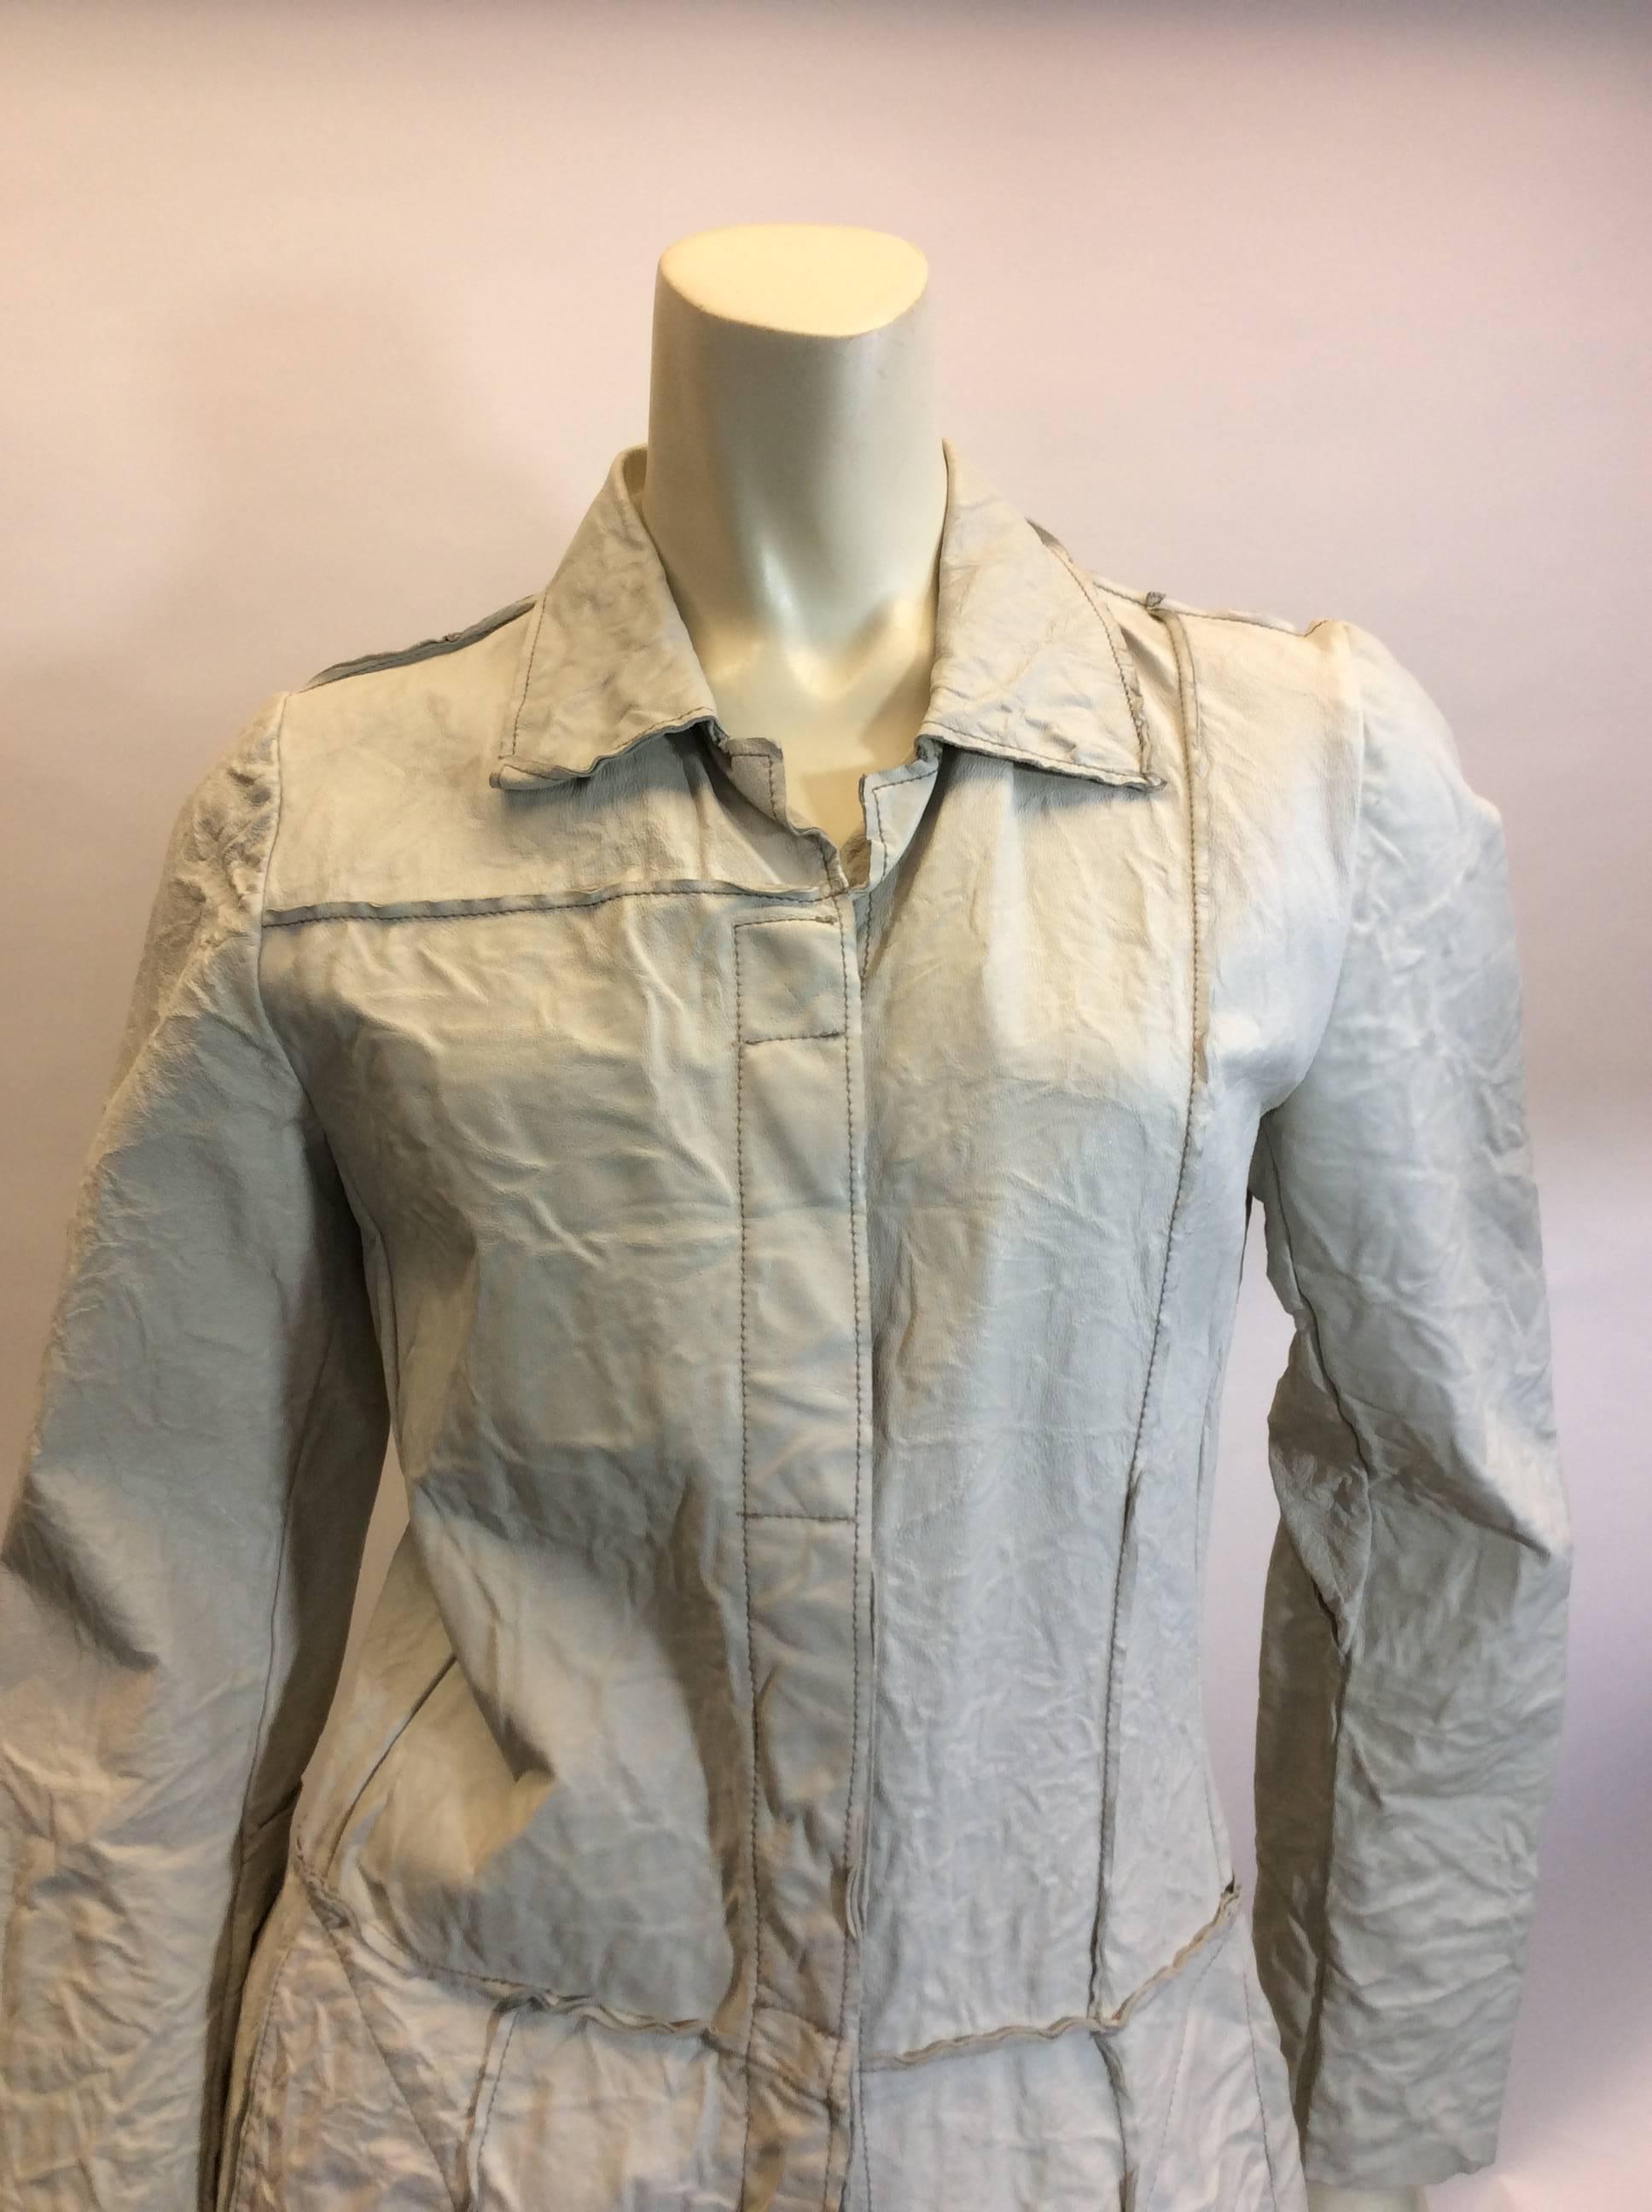 Poleci Cream Crinkle Leather Jacket
Crinkle leather
Made in the USA
Two front pockets
Button closures
Size 6
$199